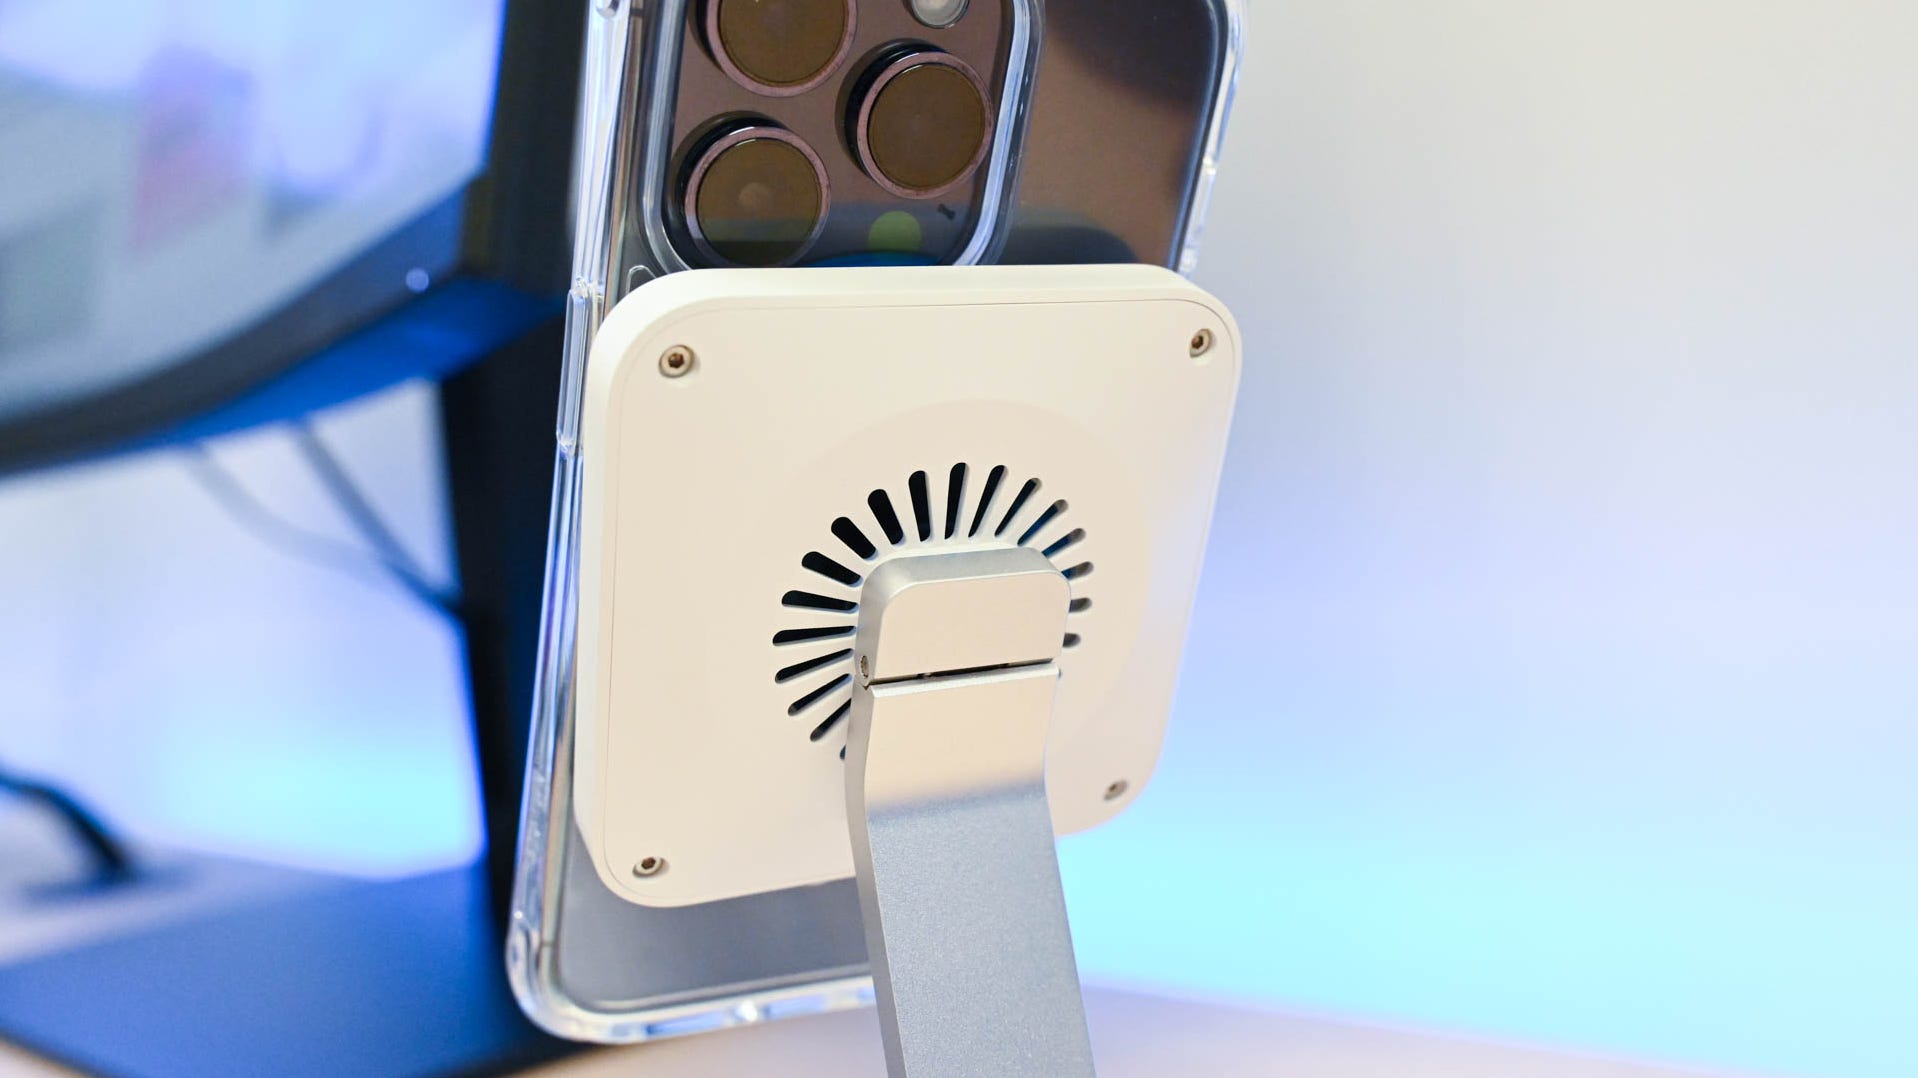 Fan on the back of the ESR HaloLock 2-in-1 Wireless Charger with CryoBoost